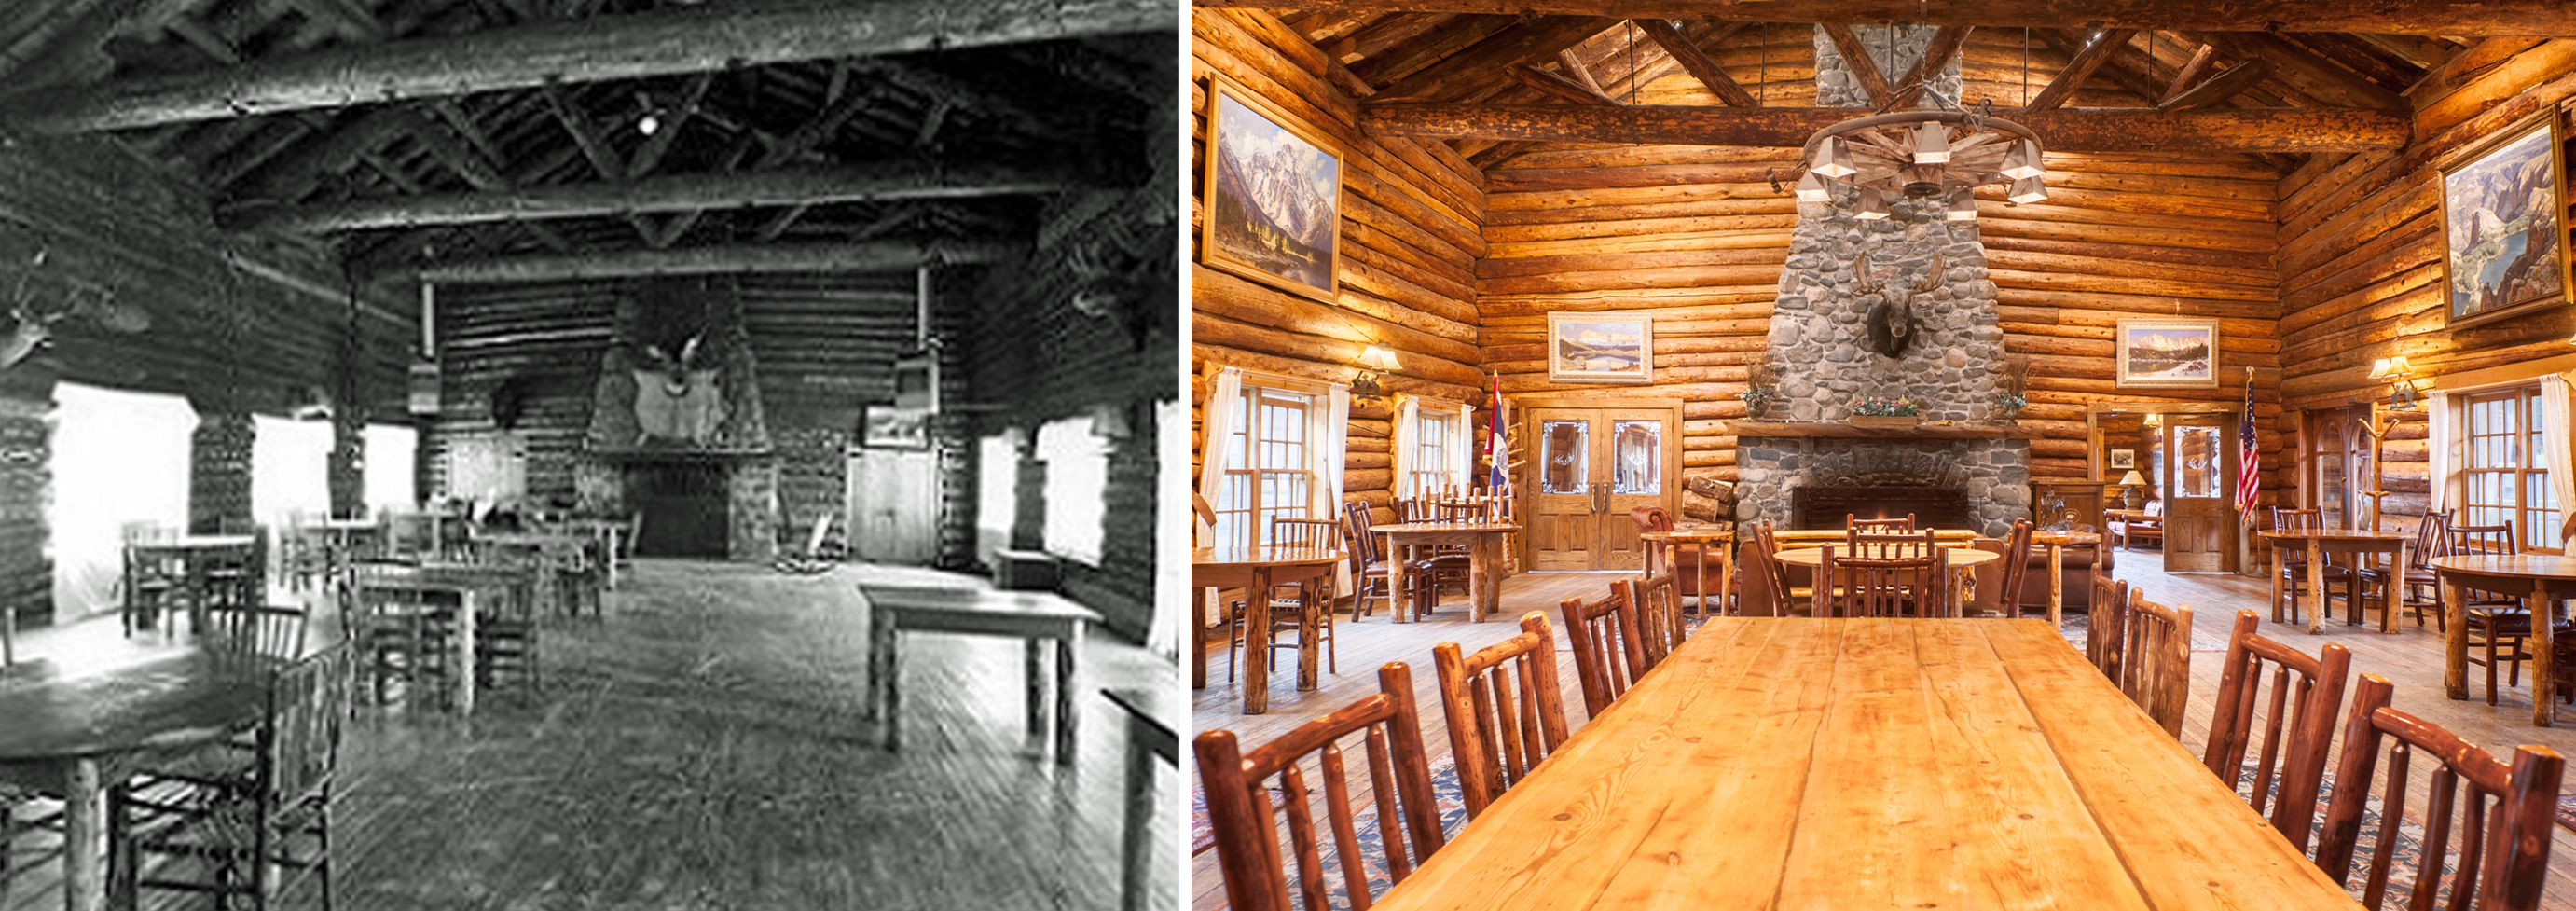 The historic dining hall at Brooks Lake Lodge, seen then and now, boasts a grand fireplace and high beamed ceilings, and hosts guests for gourmet meals included with an overnight stay.